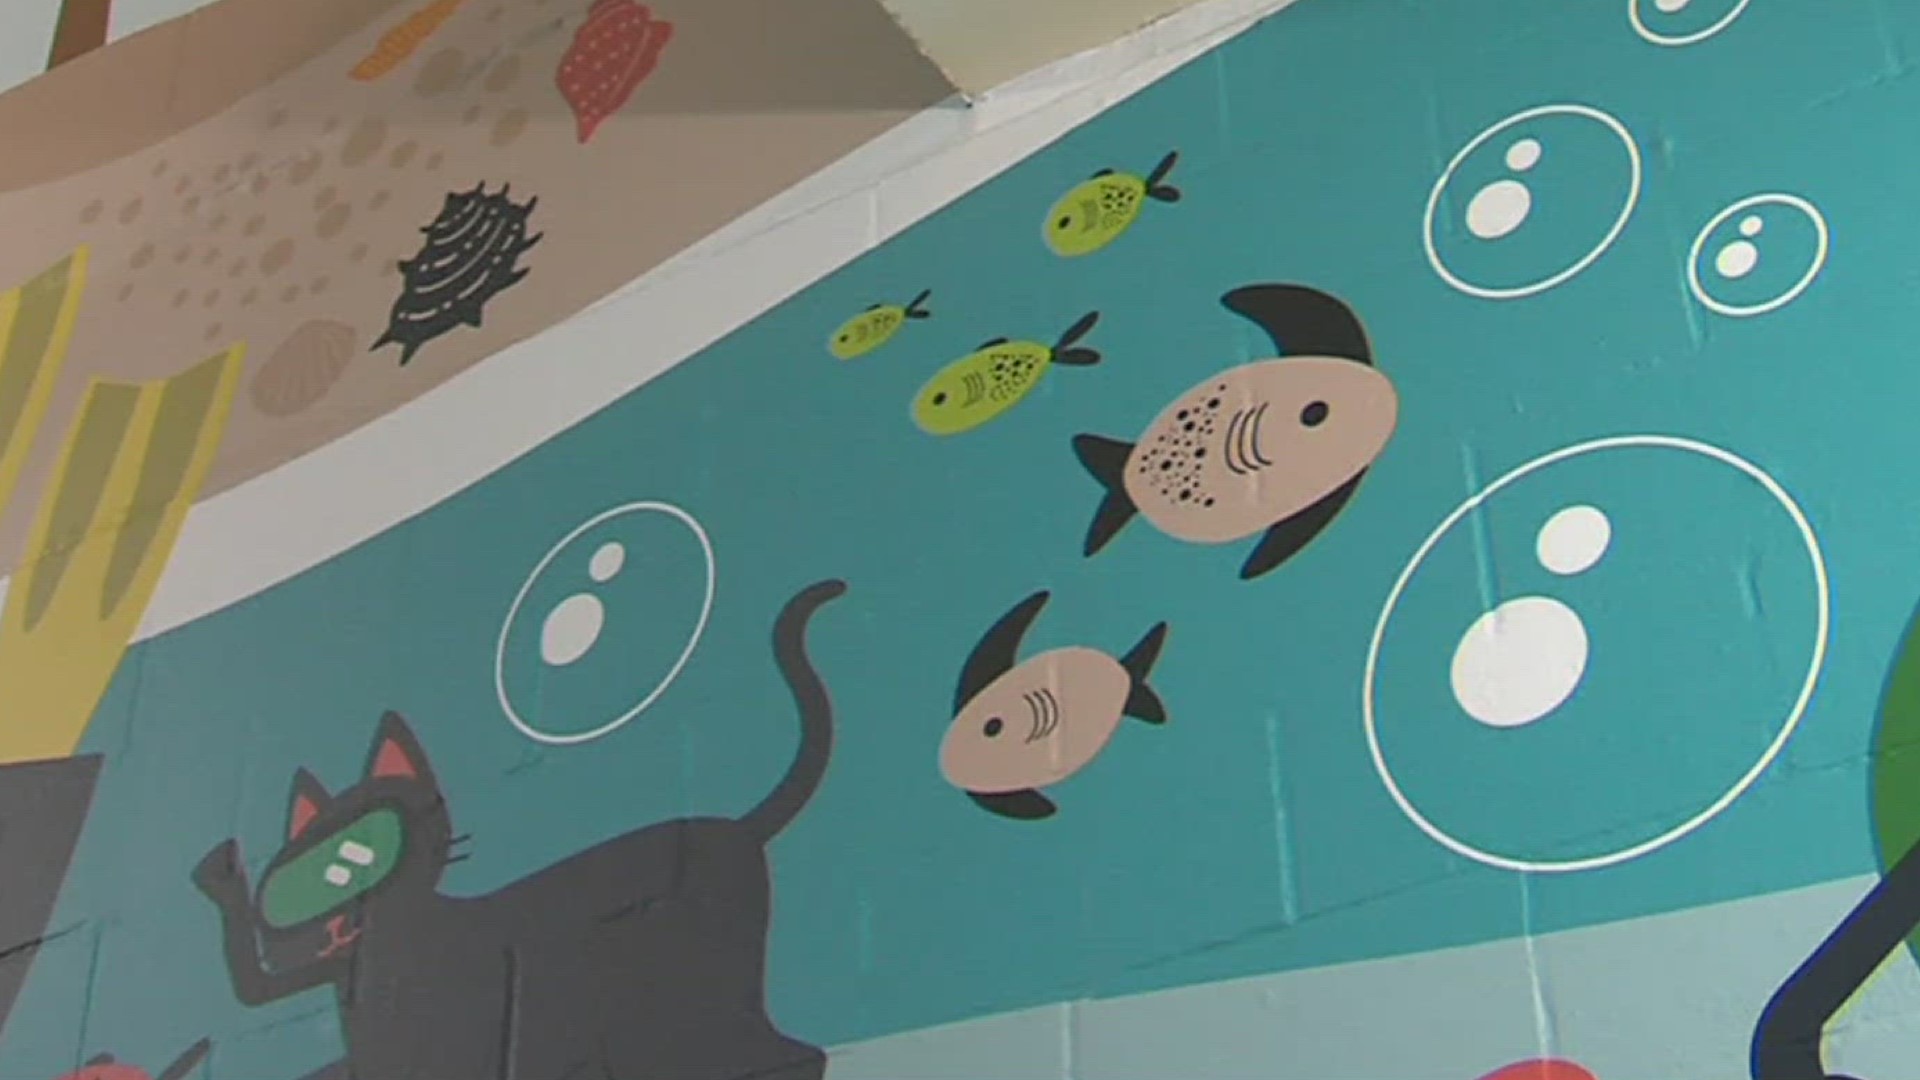 3NEWS spoke with TAMU-CC student Lauren Burdette who helped create the project. She said that the team wanted something the students could relate to.